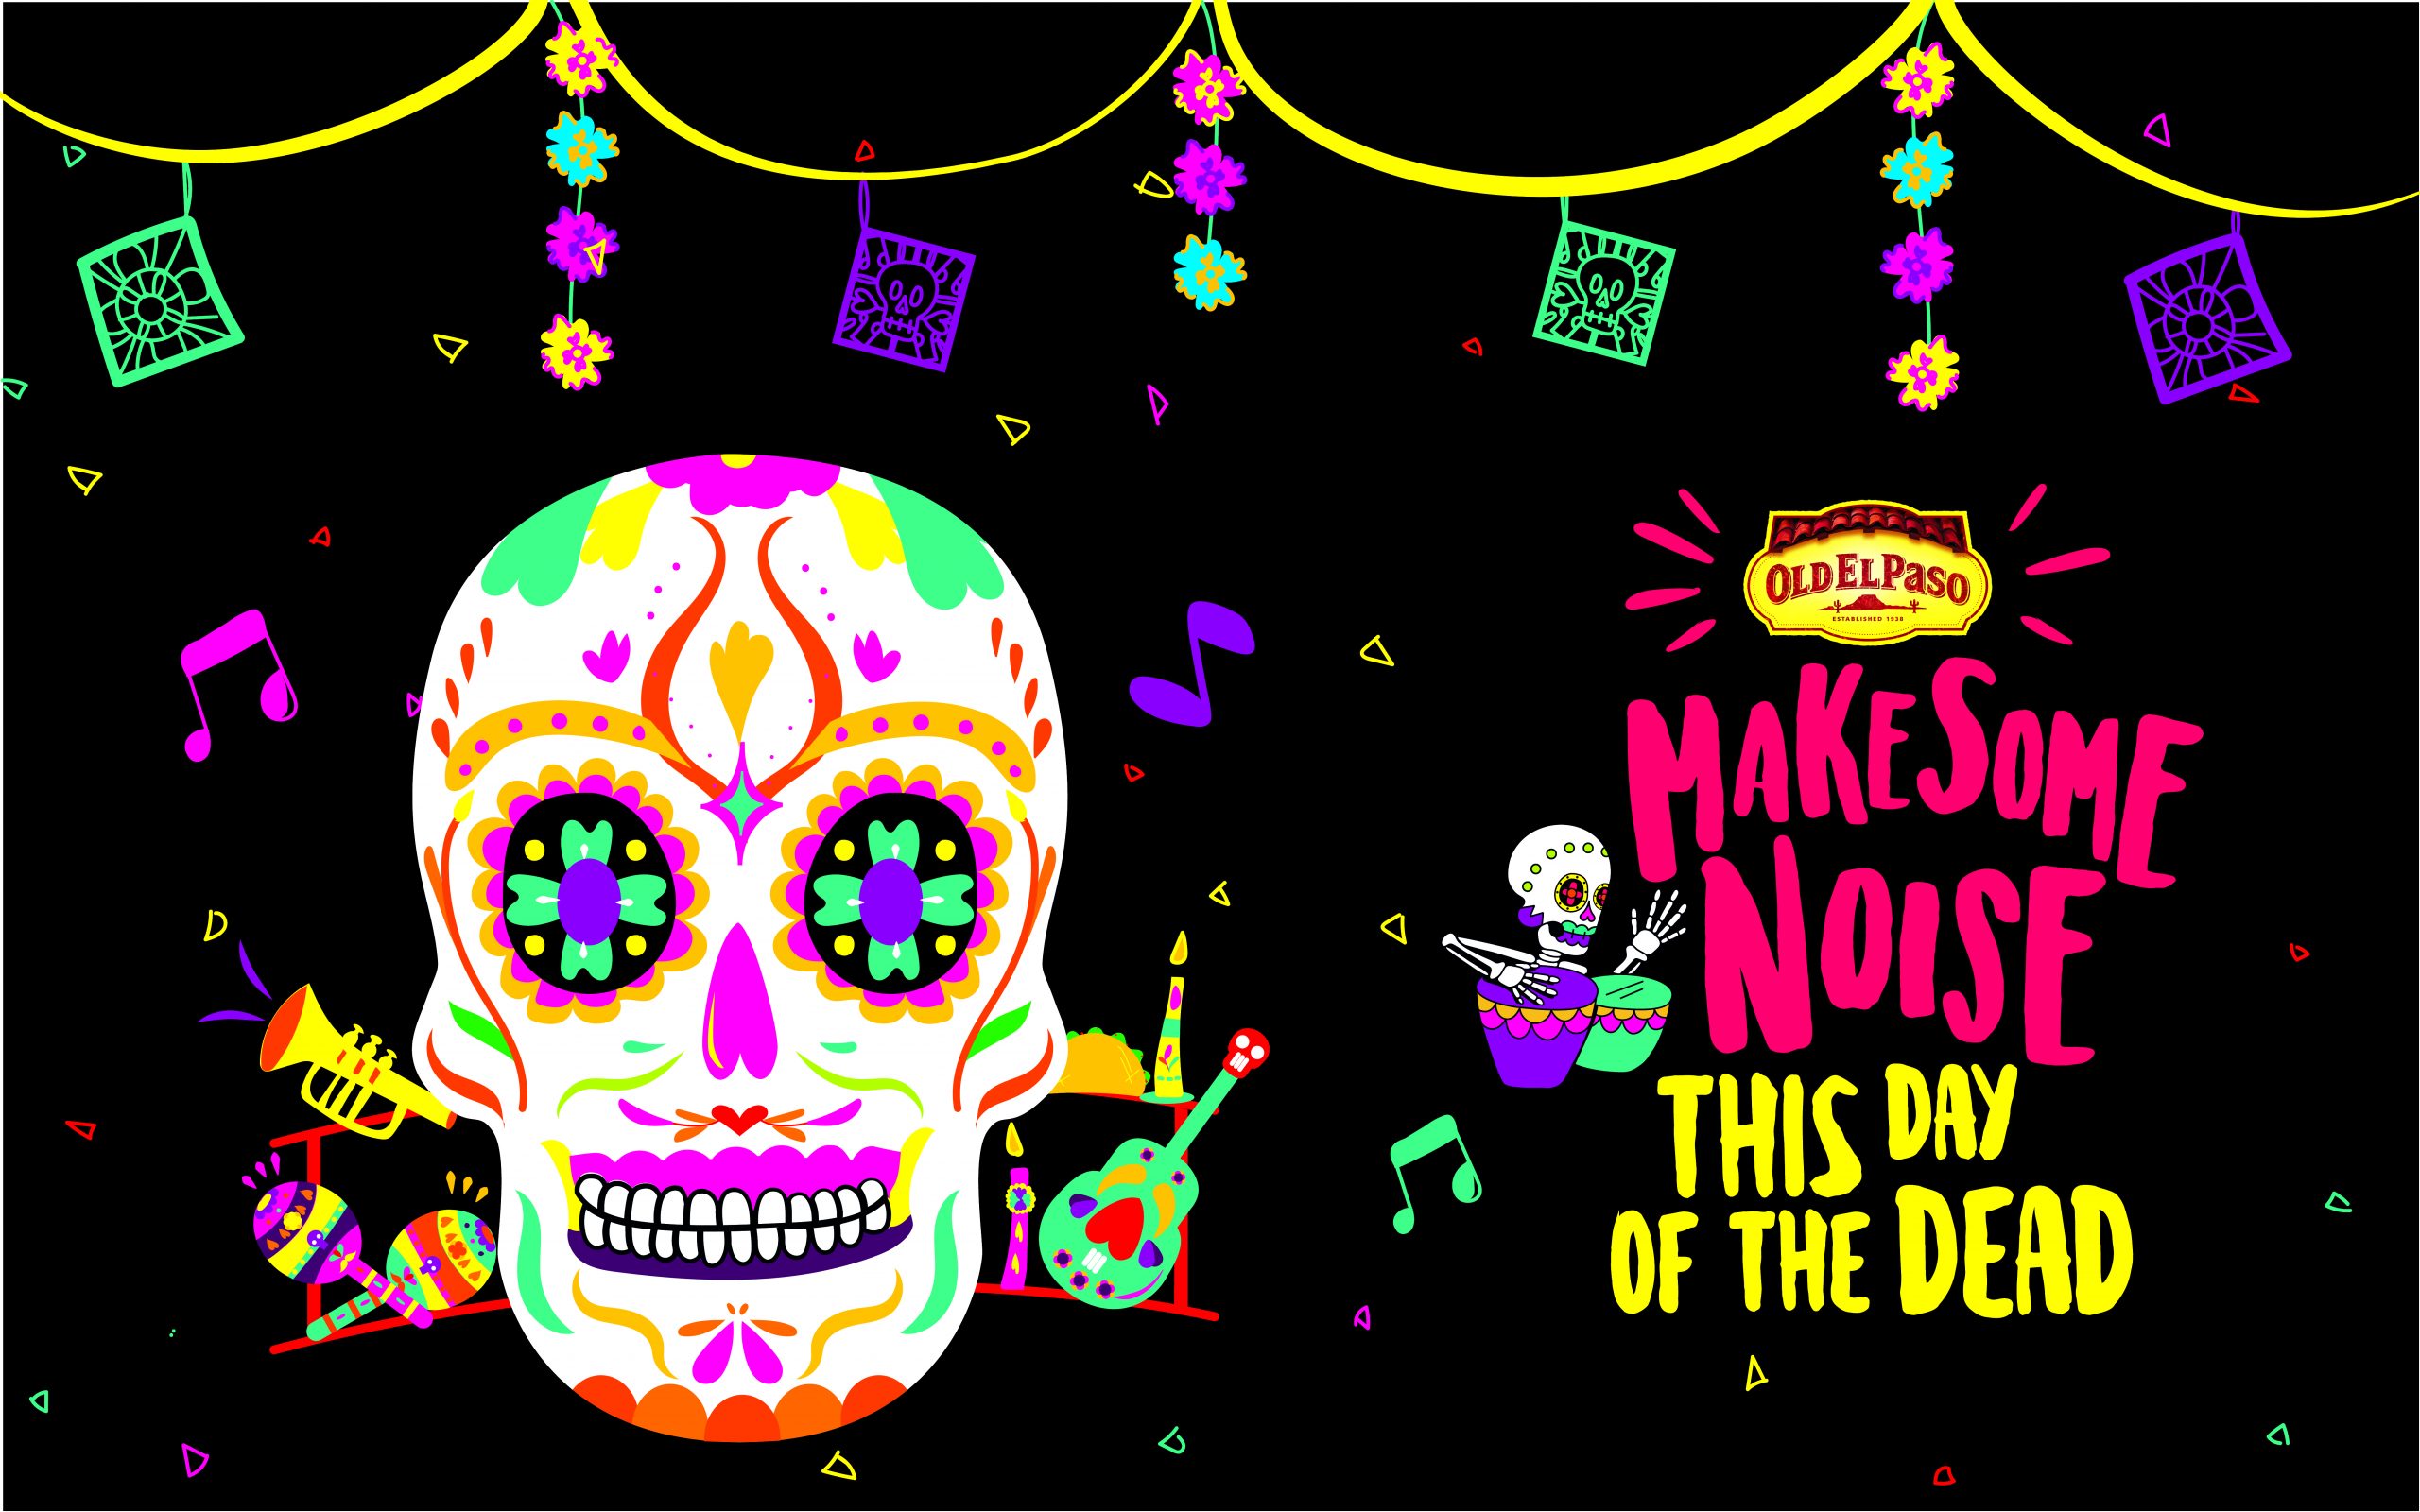 Old El Paso invites the UK to make some noise this Day Of The Dead